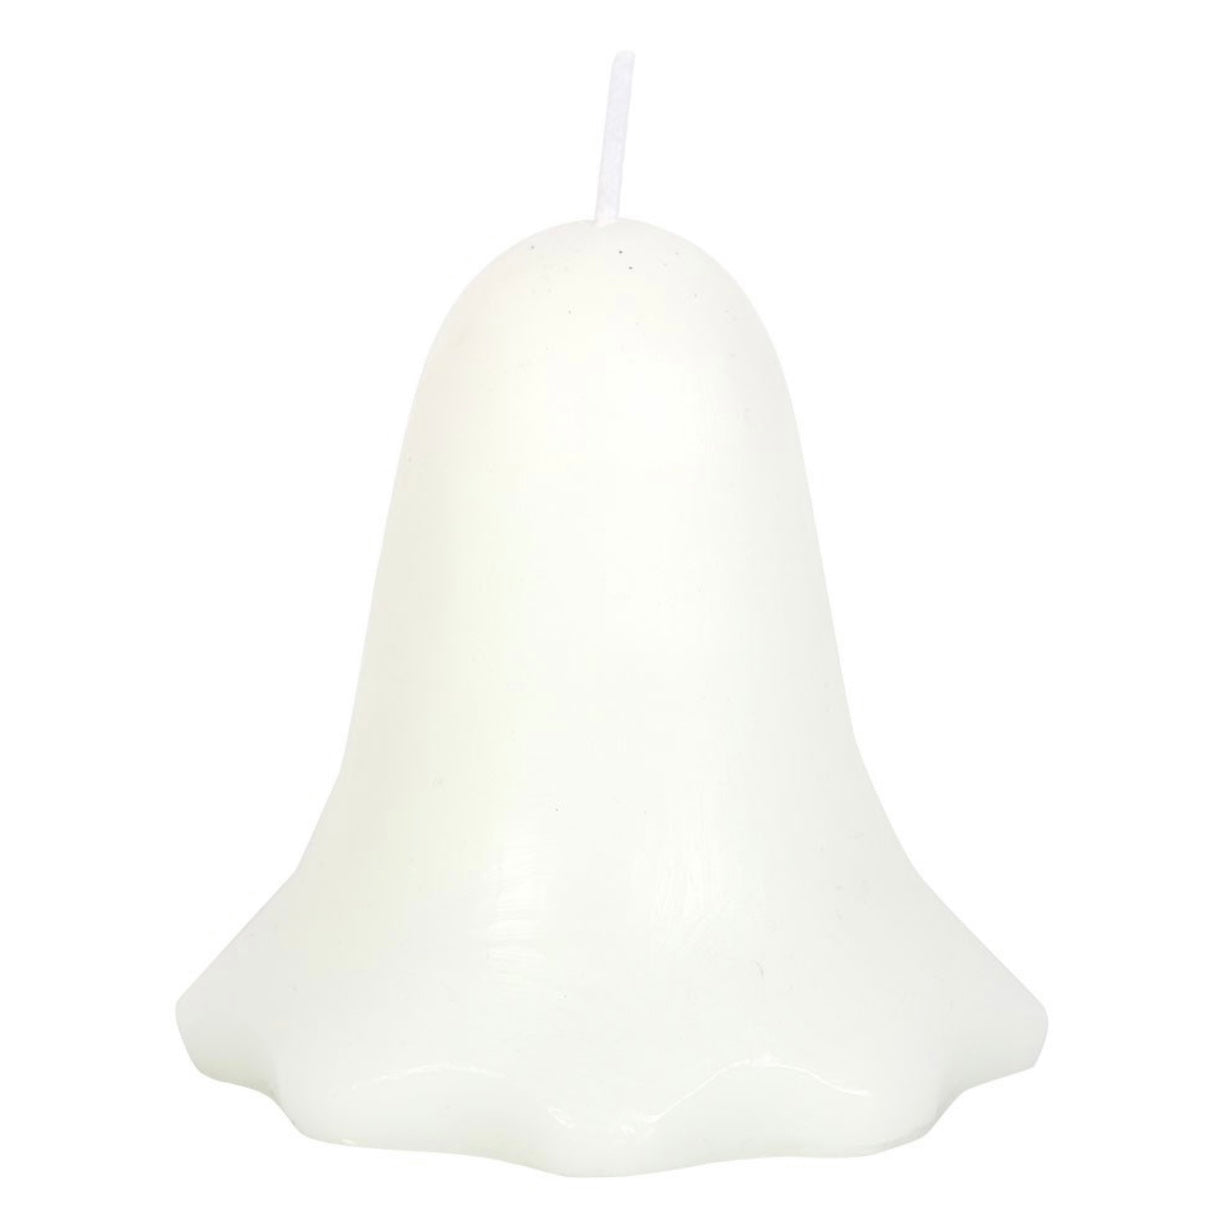 Unscented Ghost Candle